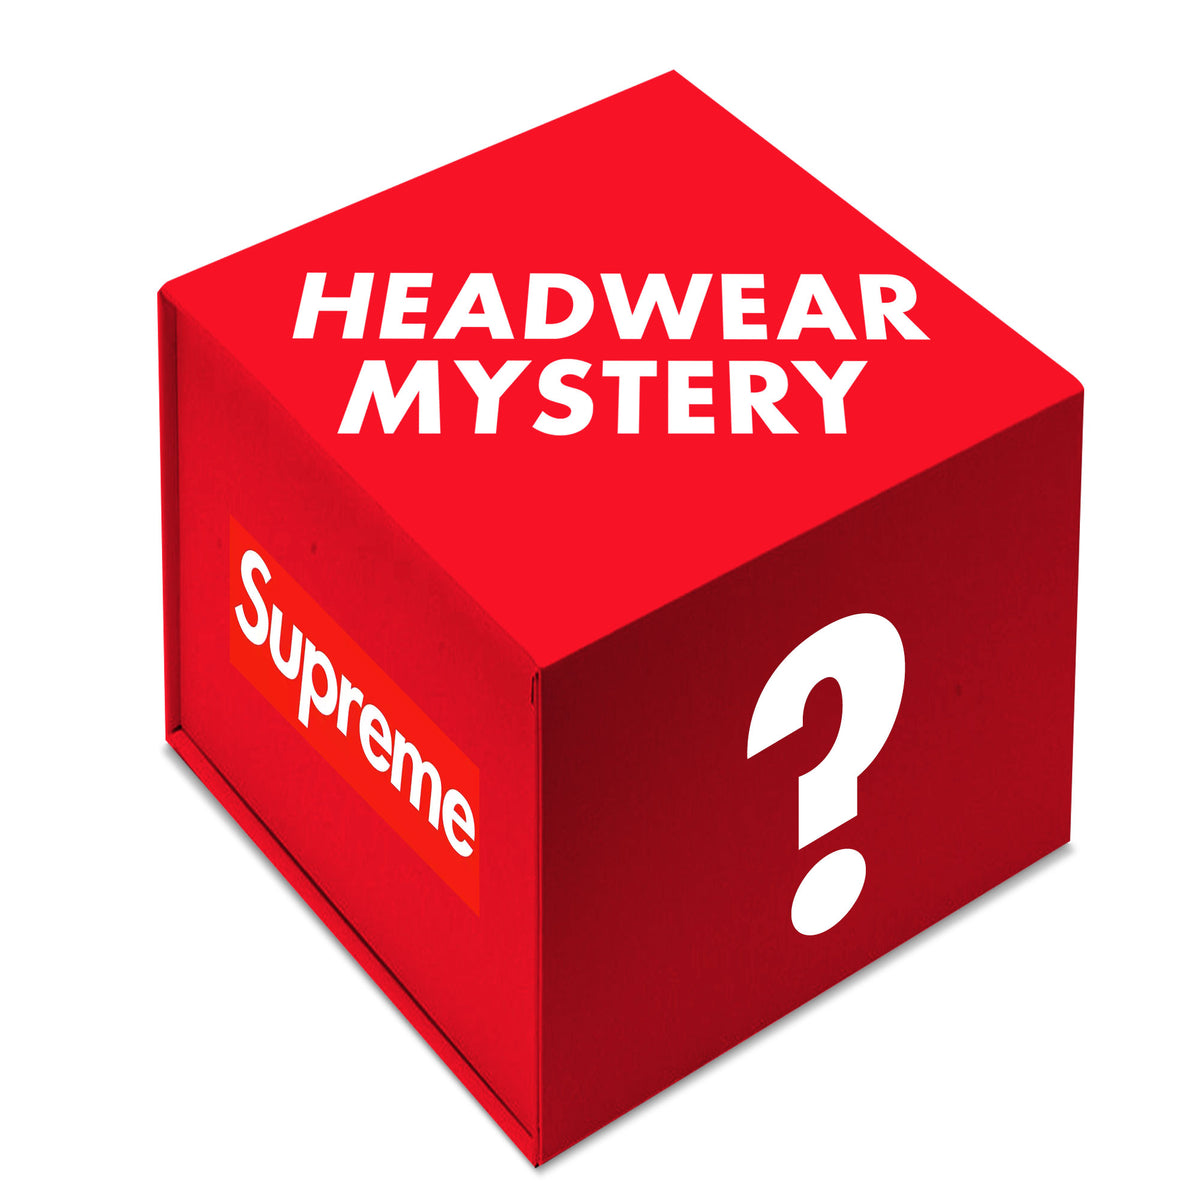 Supreme - Online Mystery Boxes